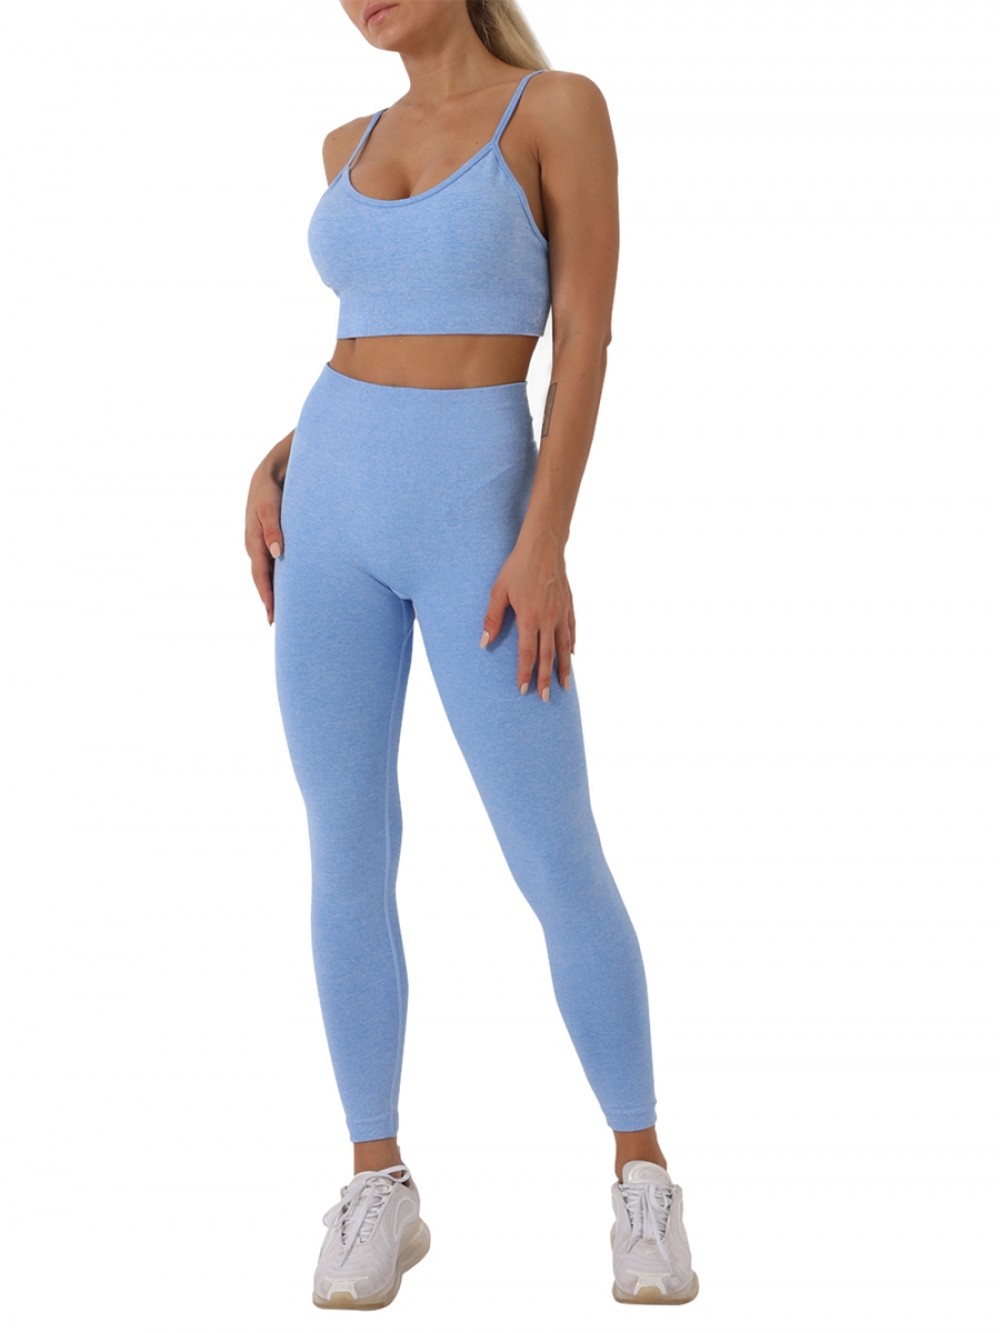 Blue Spaghetti Straps Sports Bra Suit Seamless Exercise Outfit